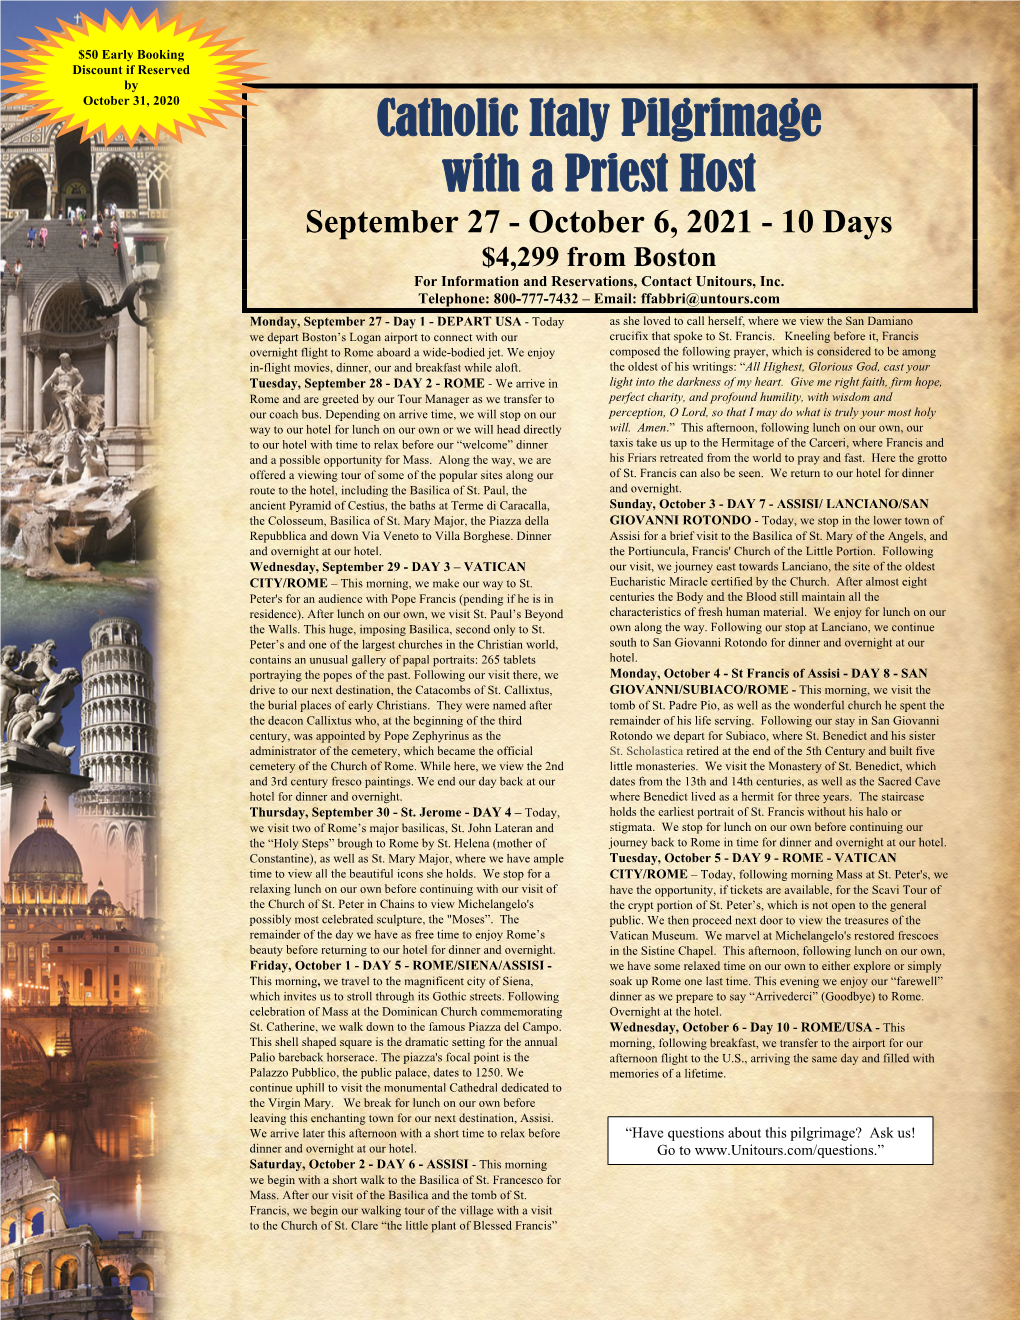 Catholic Italy Pilgrimage with a Priest Host September 27 - October 6, 2021 - 10 Days $4,299 from Boston for Information and Reservations, Contact Unitours, Inc